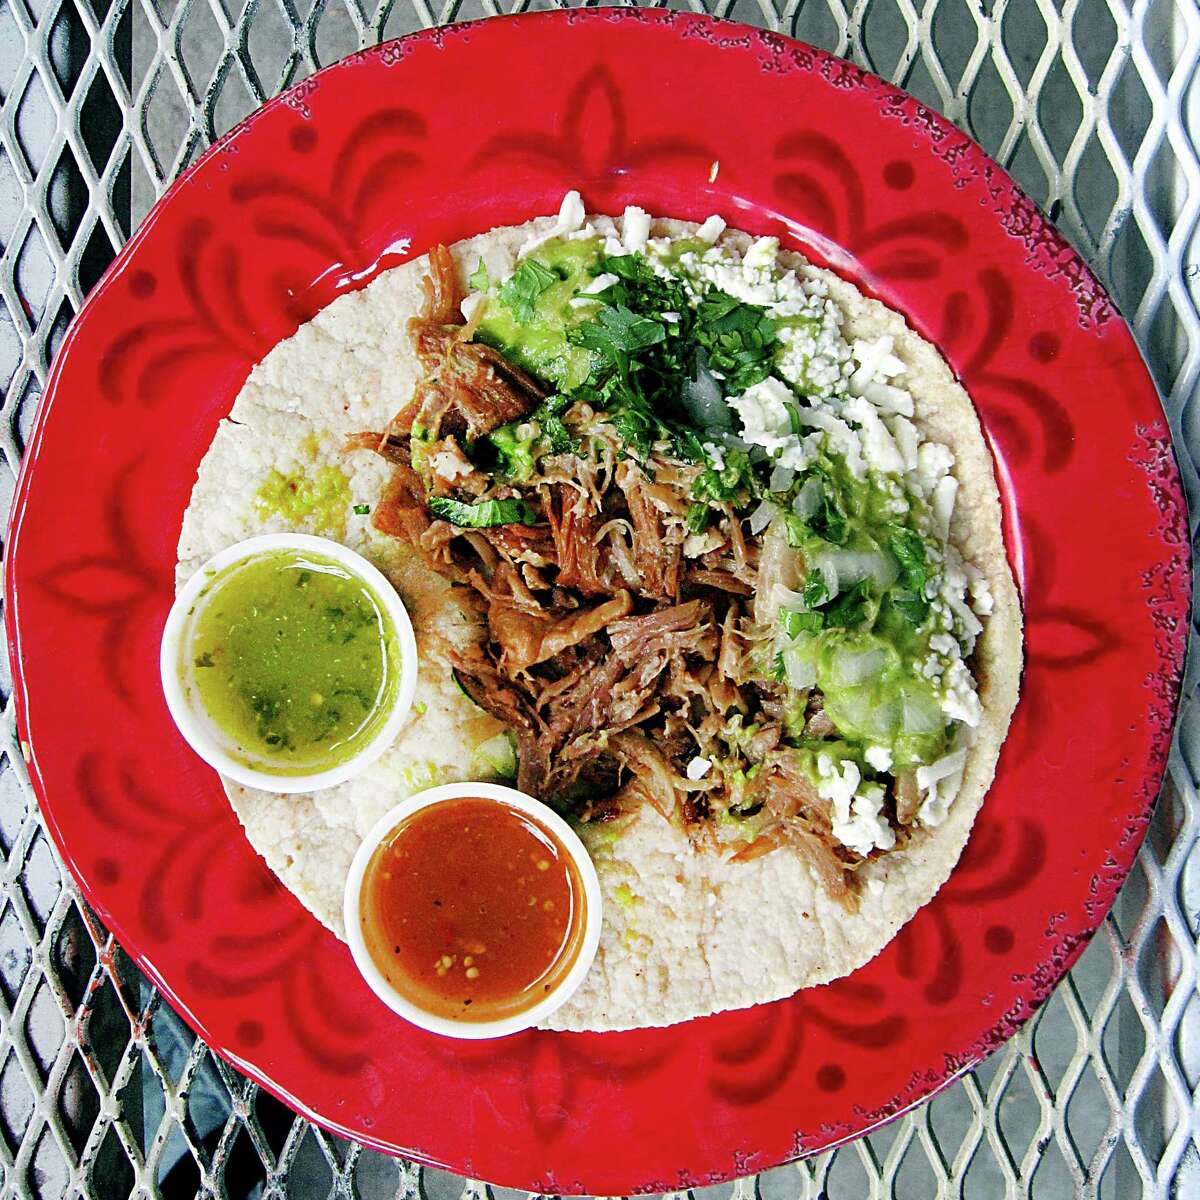 Taco of the Week: Carnitas taco with guacamole and queso blanco on a handmade corn tortilla from Los Valles.